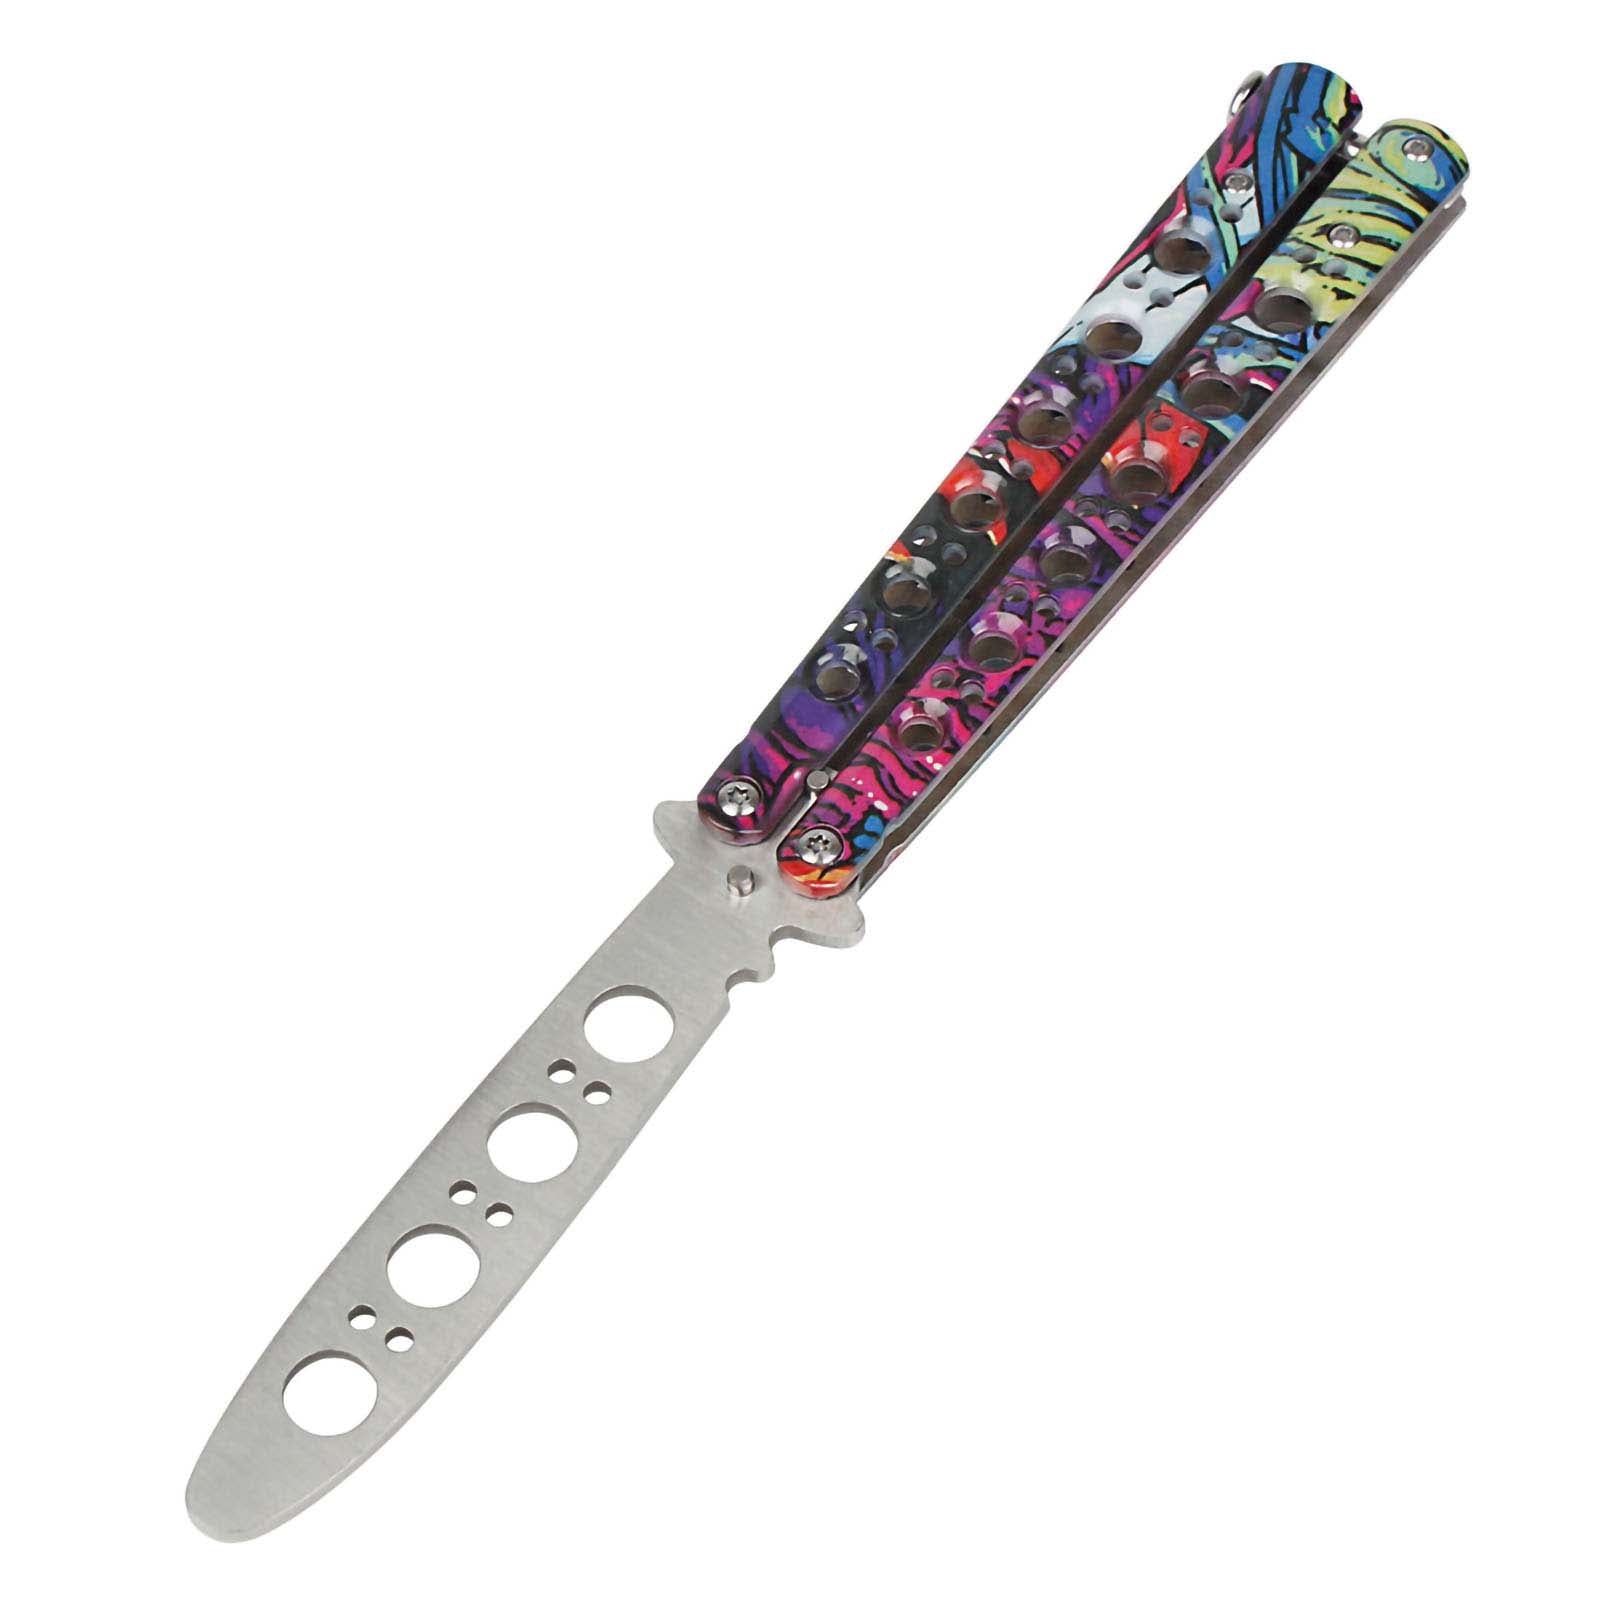 Andux Stainless Steel Balisong Colorful CS/HDD08